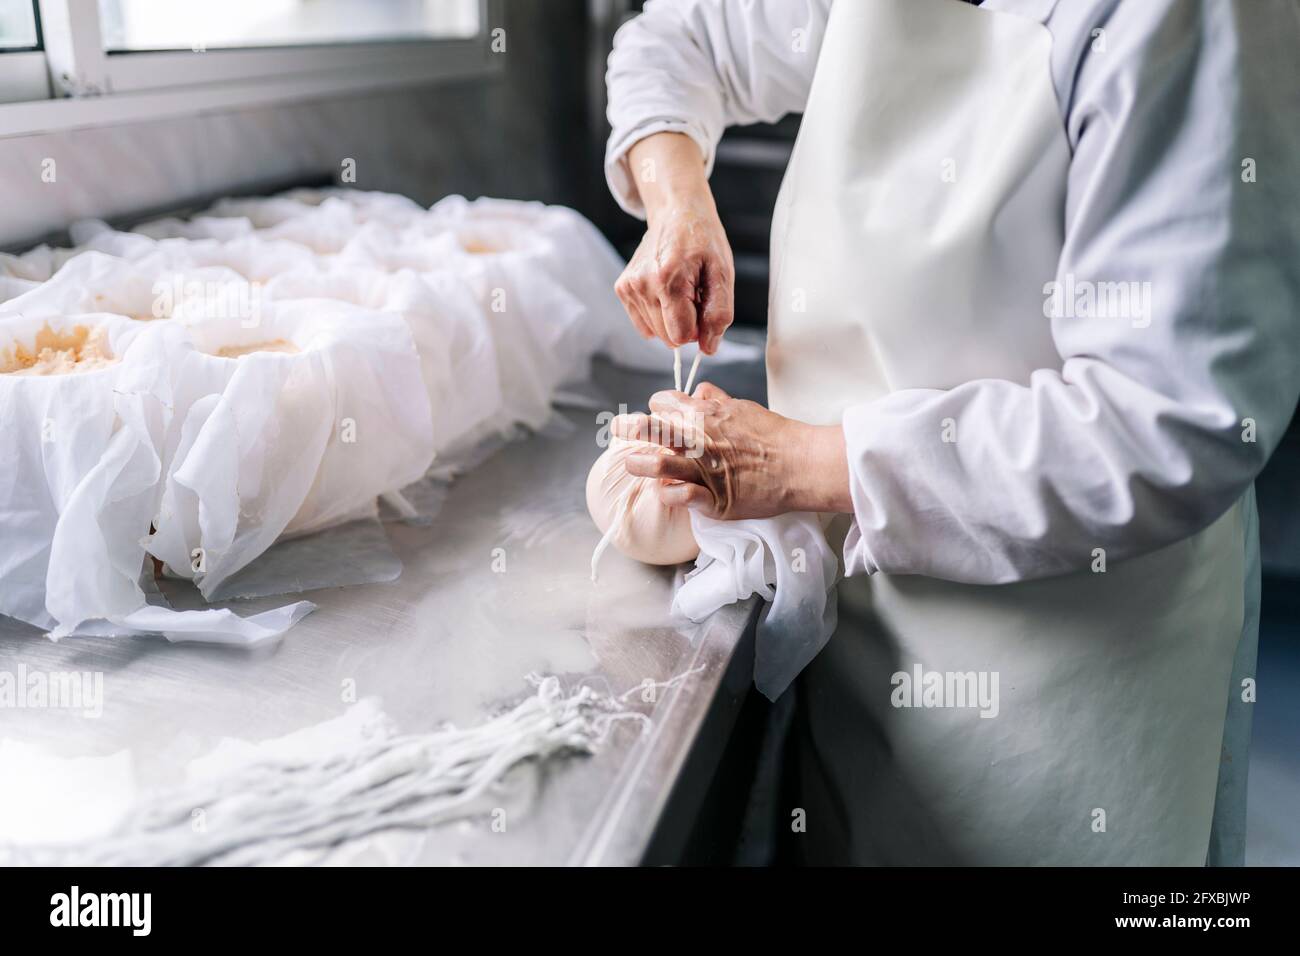 Skilled chef wrapping cheese in cloth at factory Stock Photo